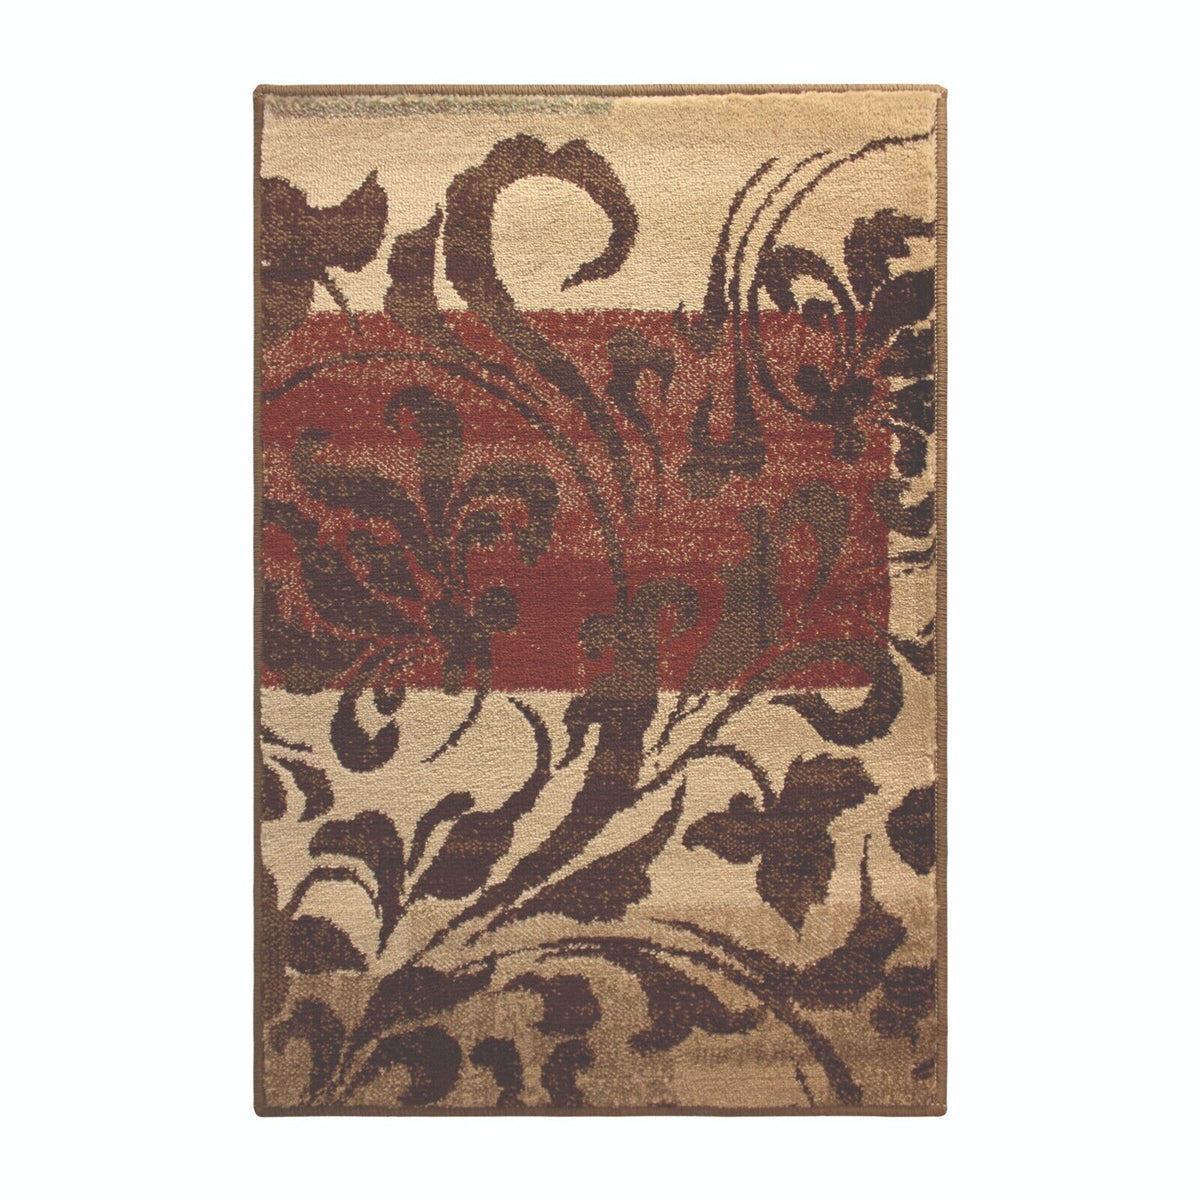 Storyville Modern Geometric Abstract Floral Scroll Area Rug or Runner